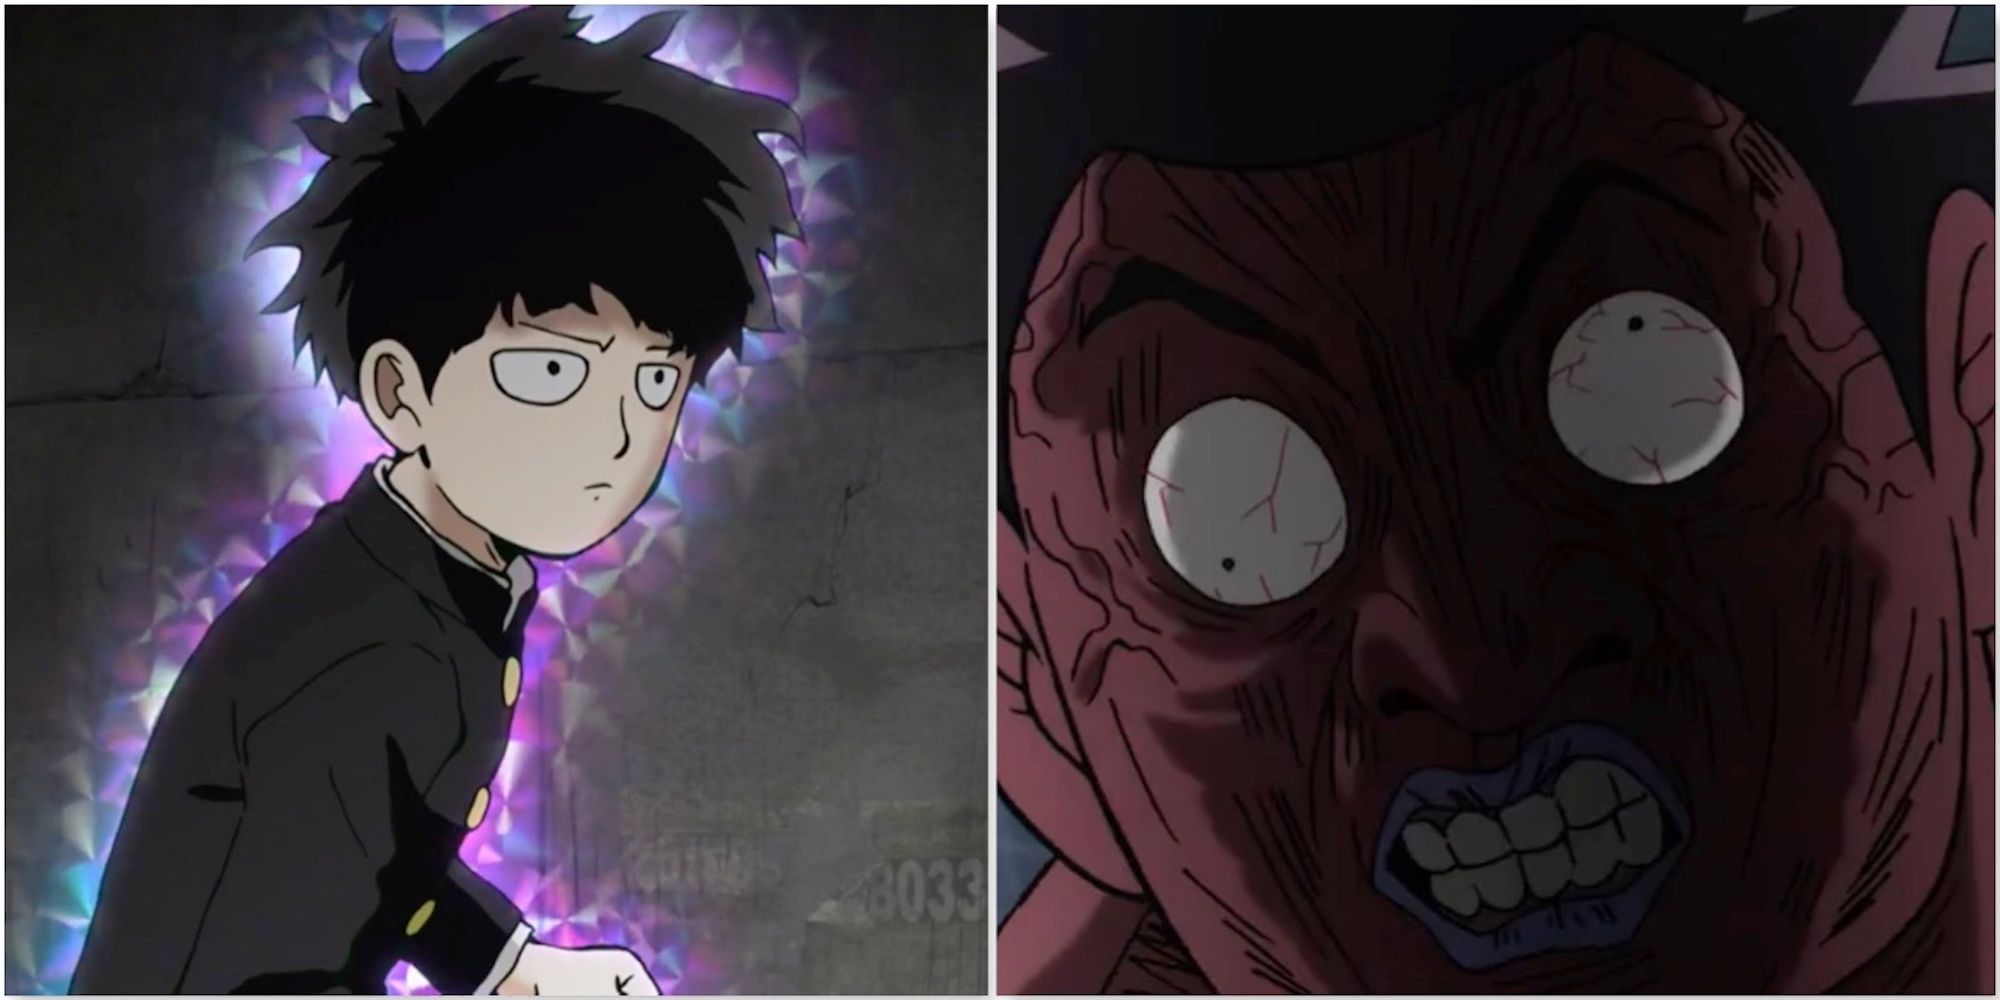 Mob and Hiroshi in Mob Psycho 100